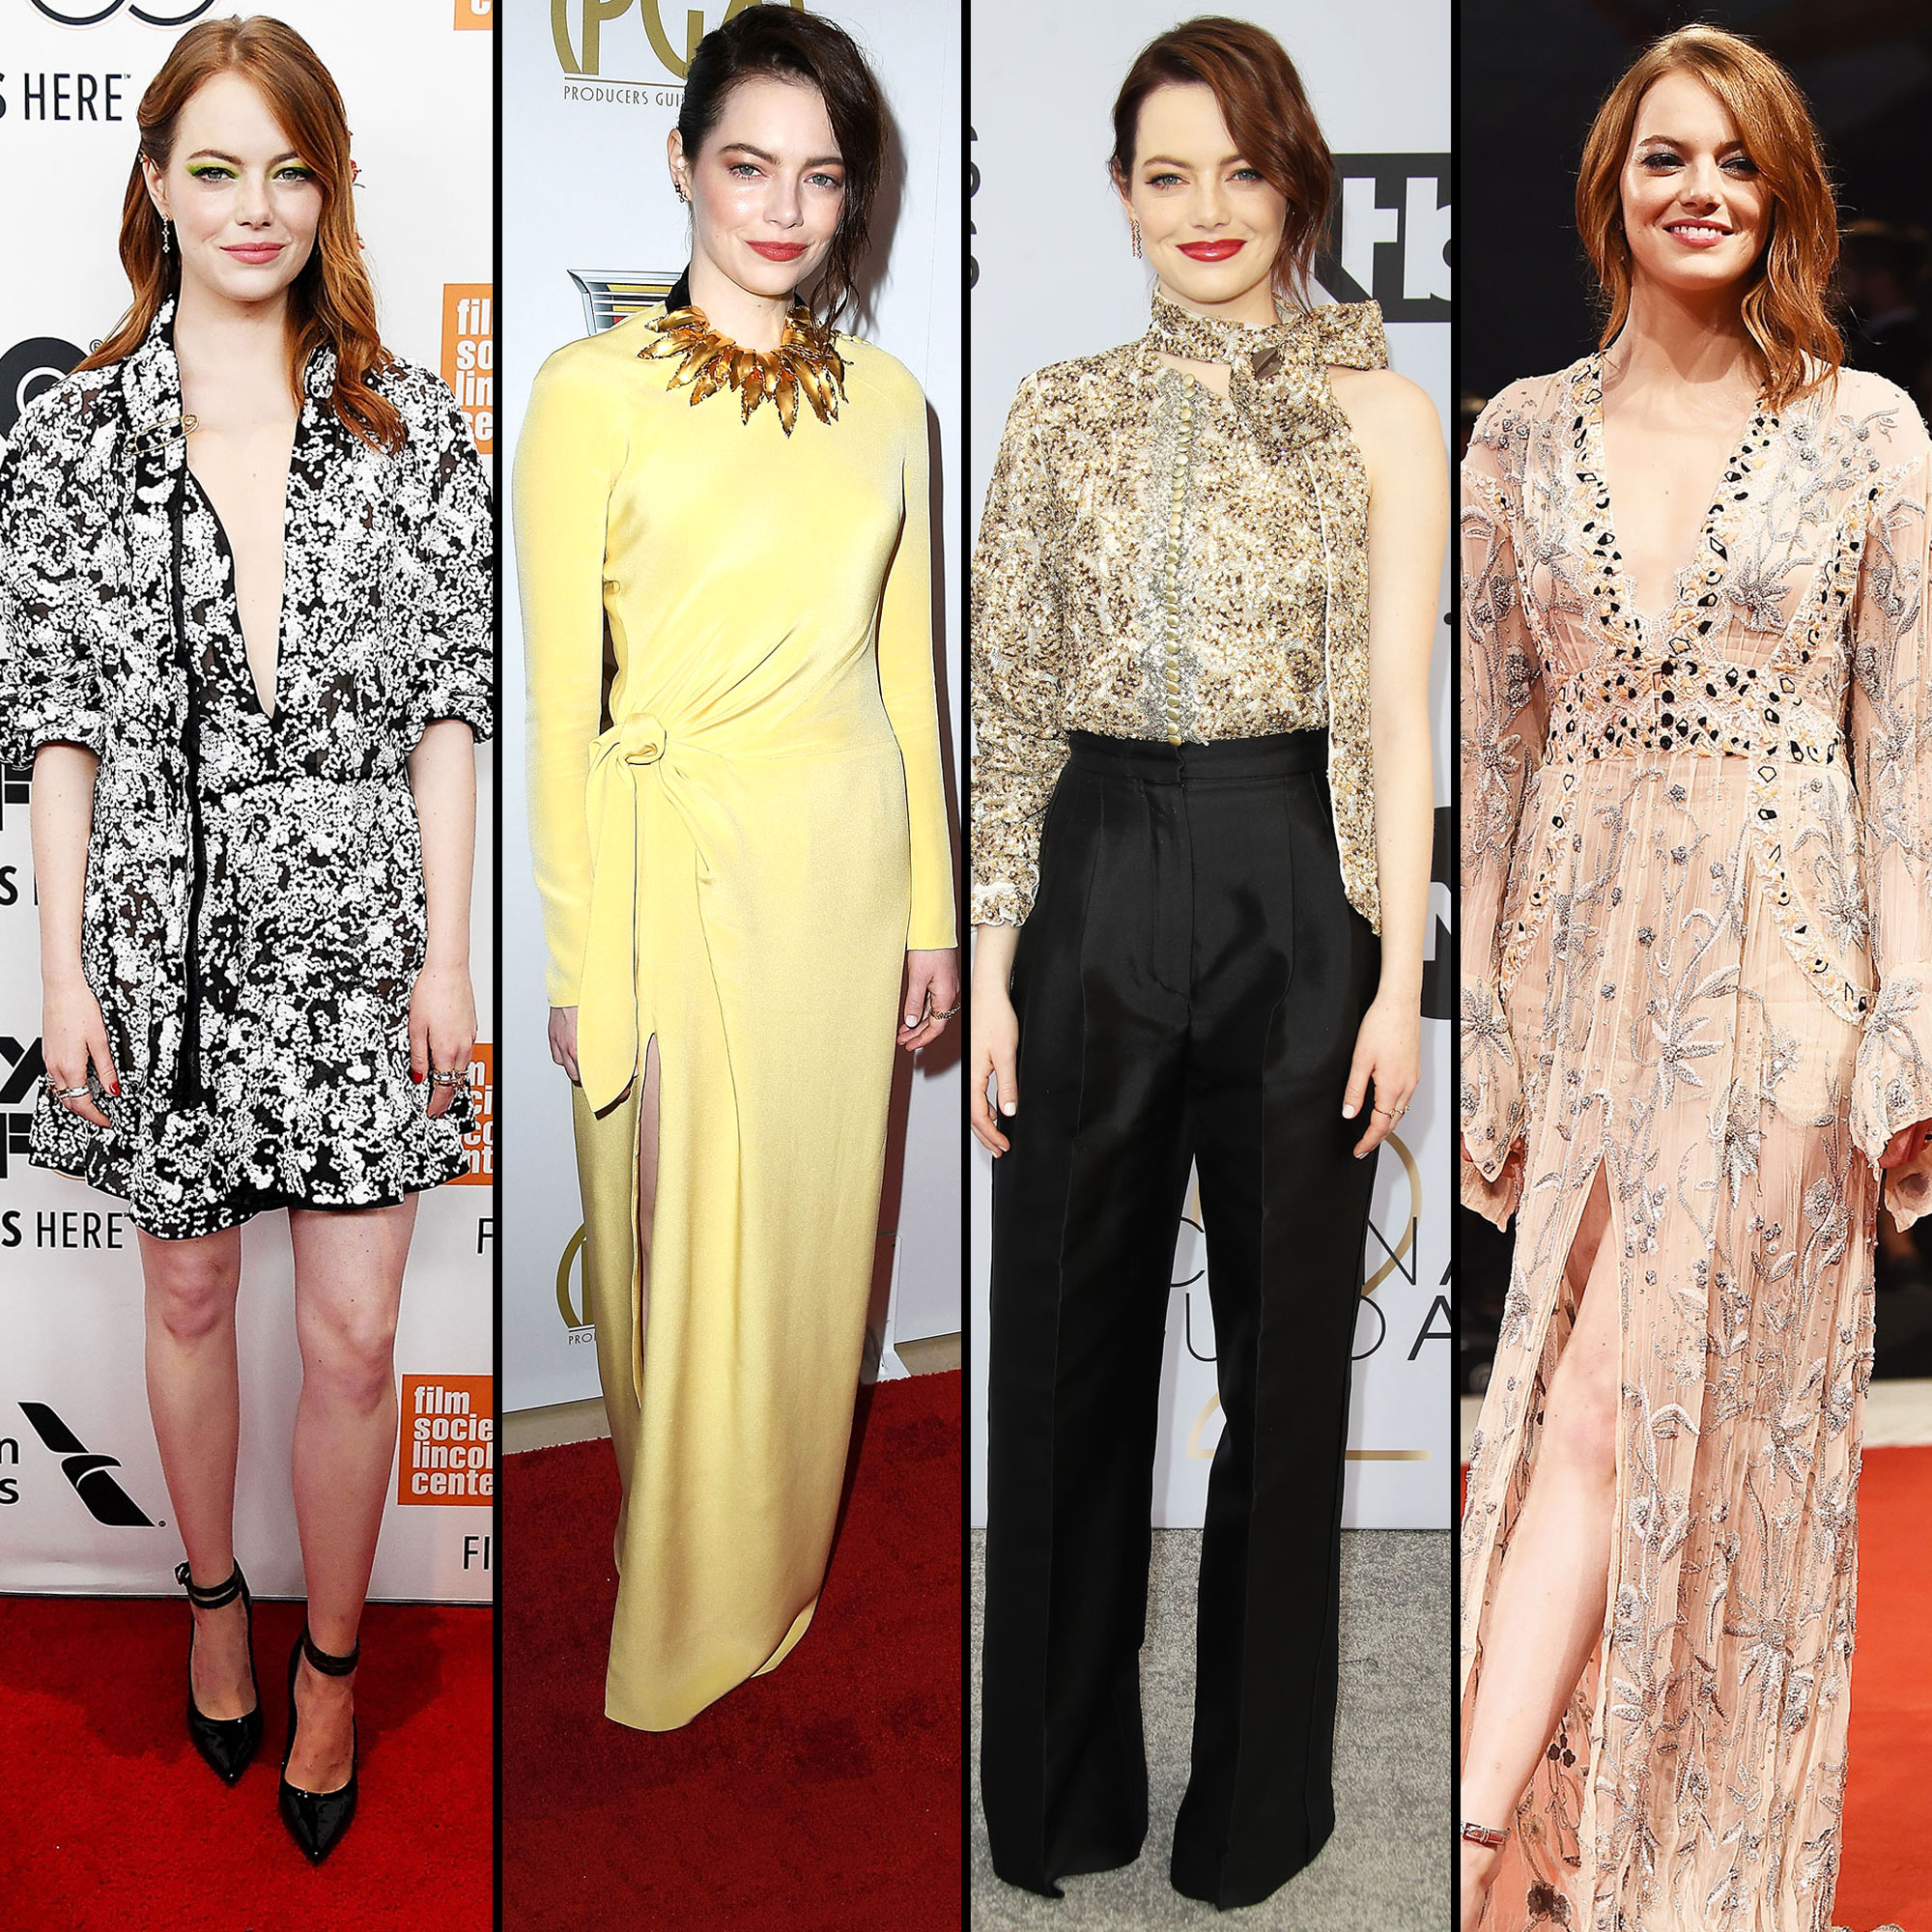 Emma Stone Wore Louis Vuitton on the Red Carpet